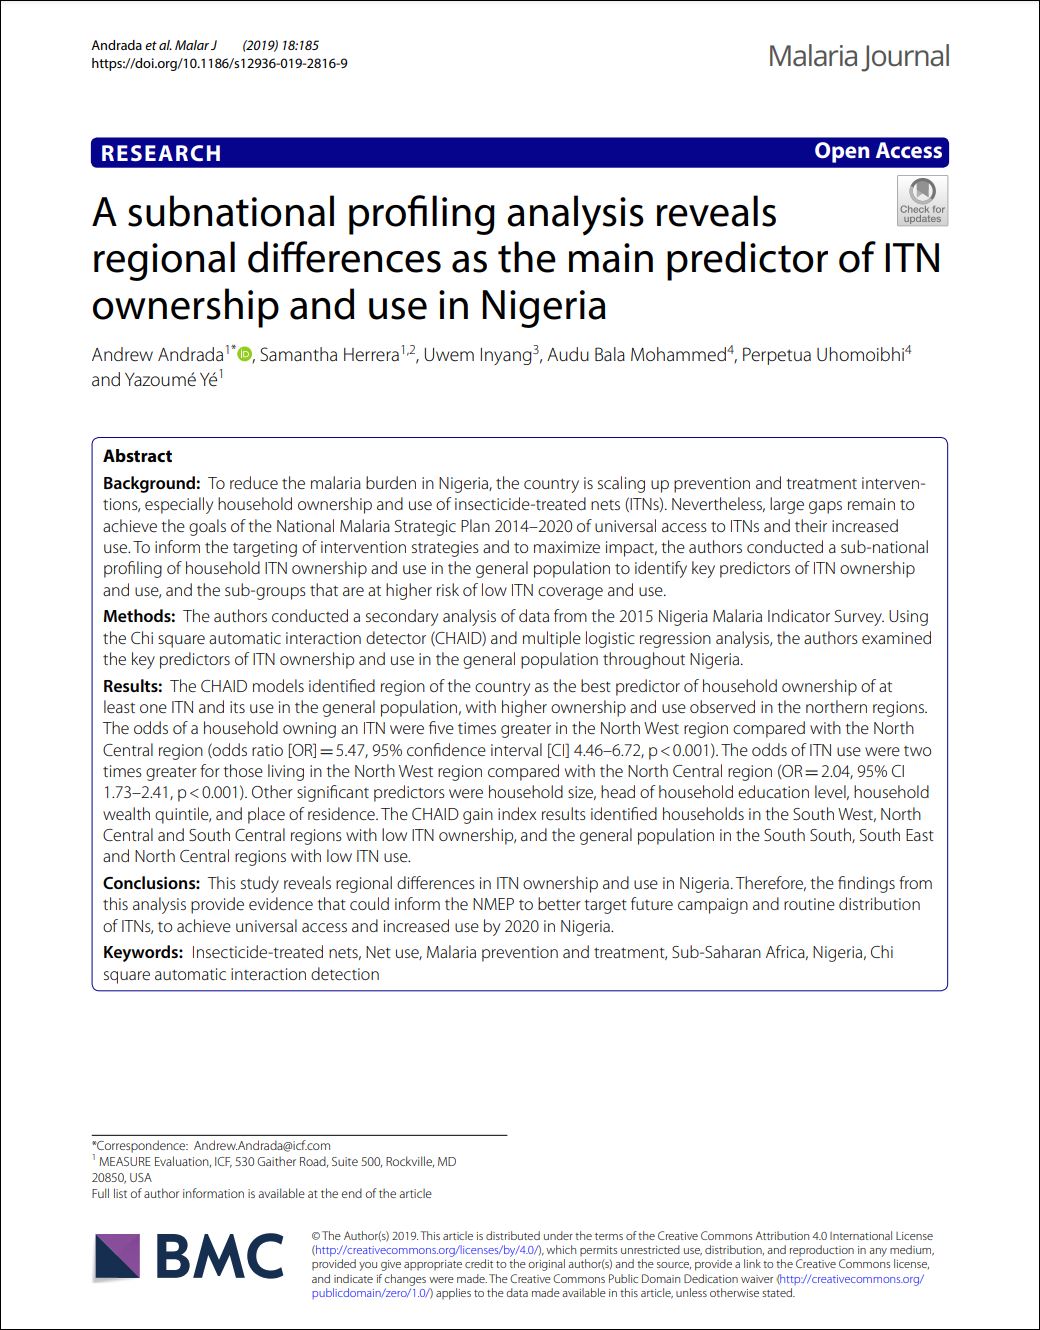 A subnational profling analysis reveals regional diferences as the main predictor of ITN ownership and use in Nigeria